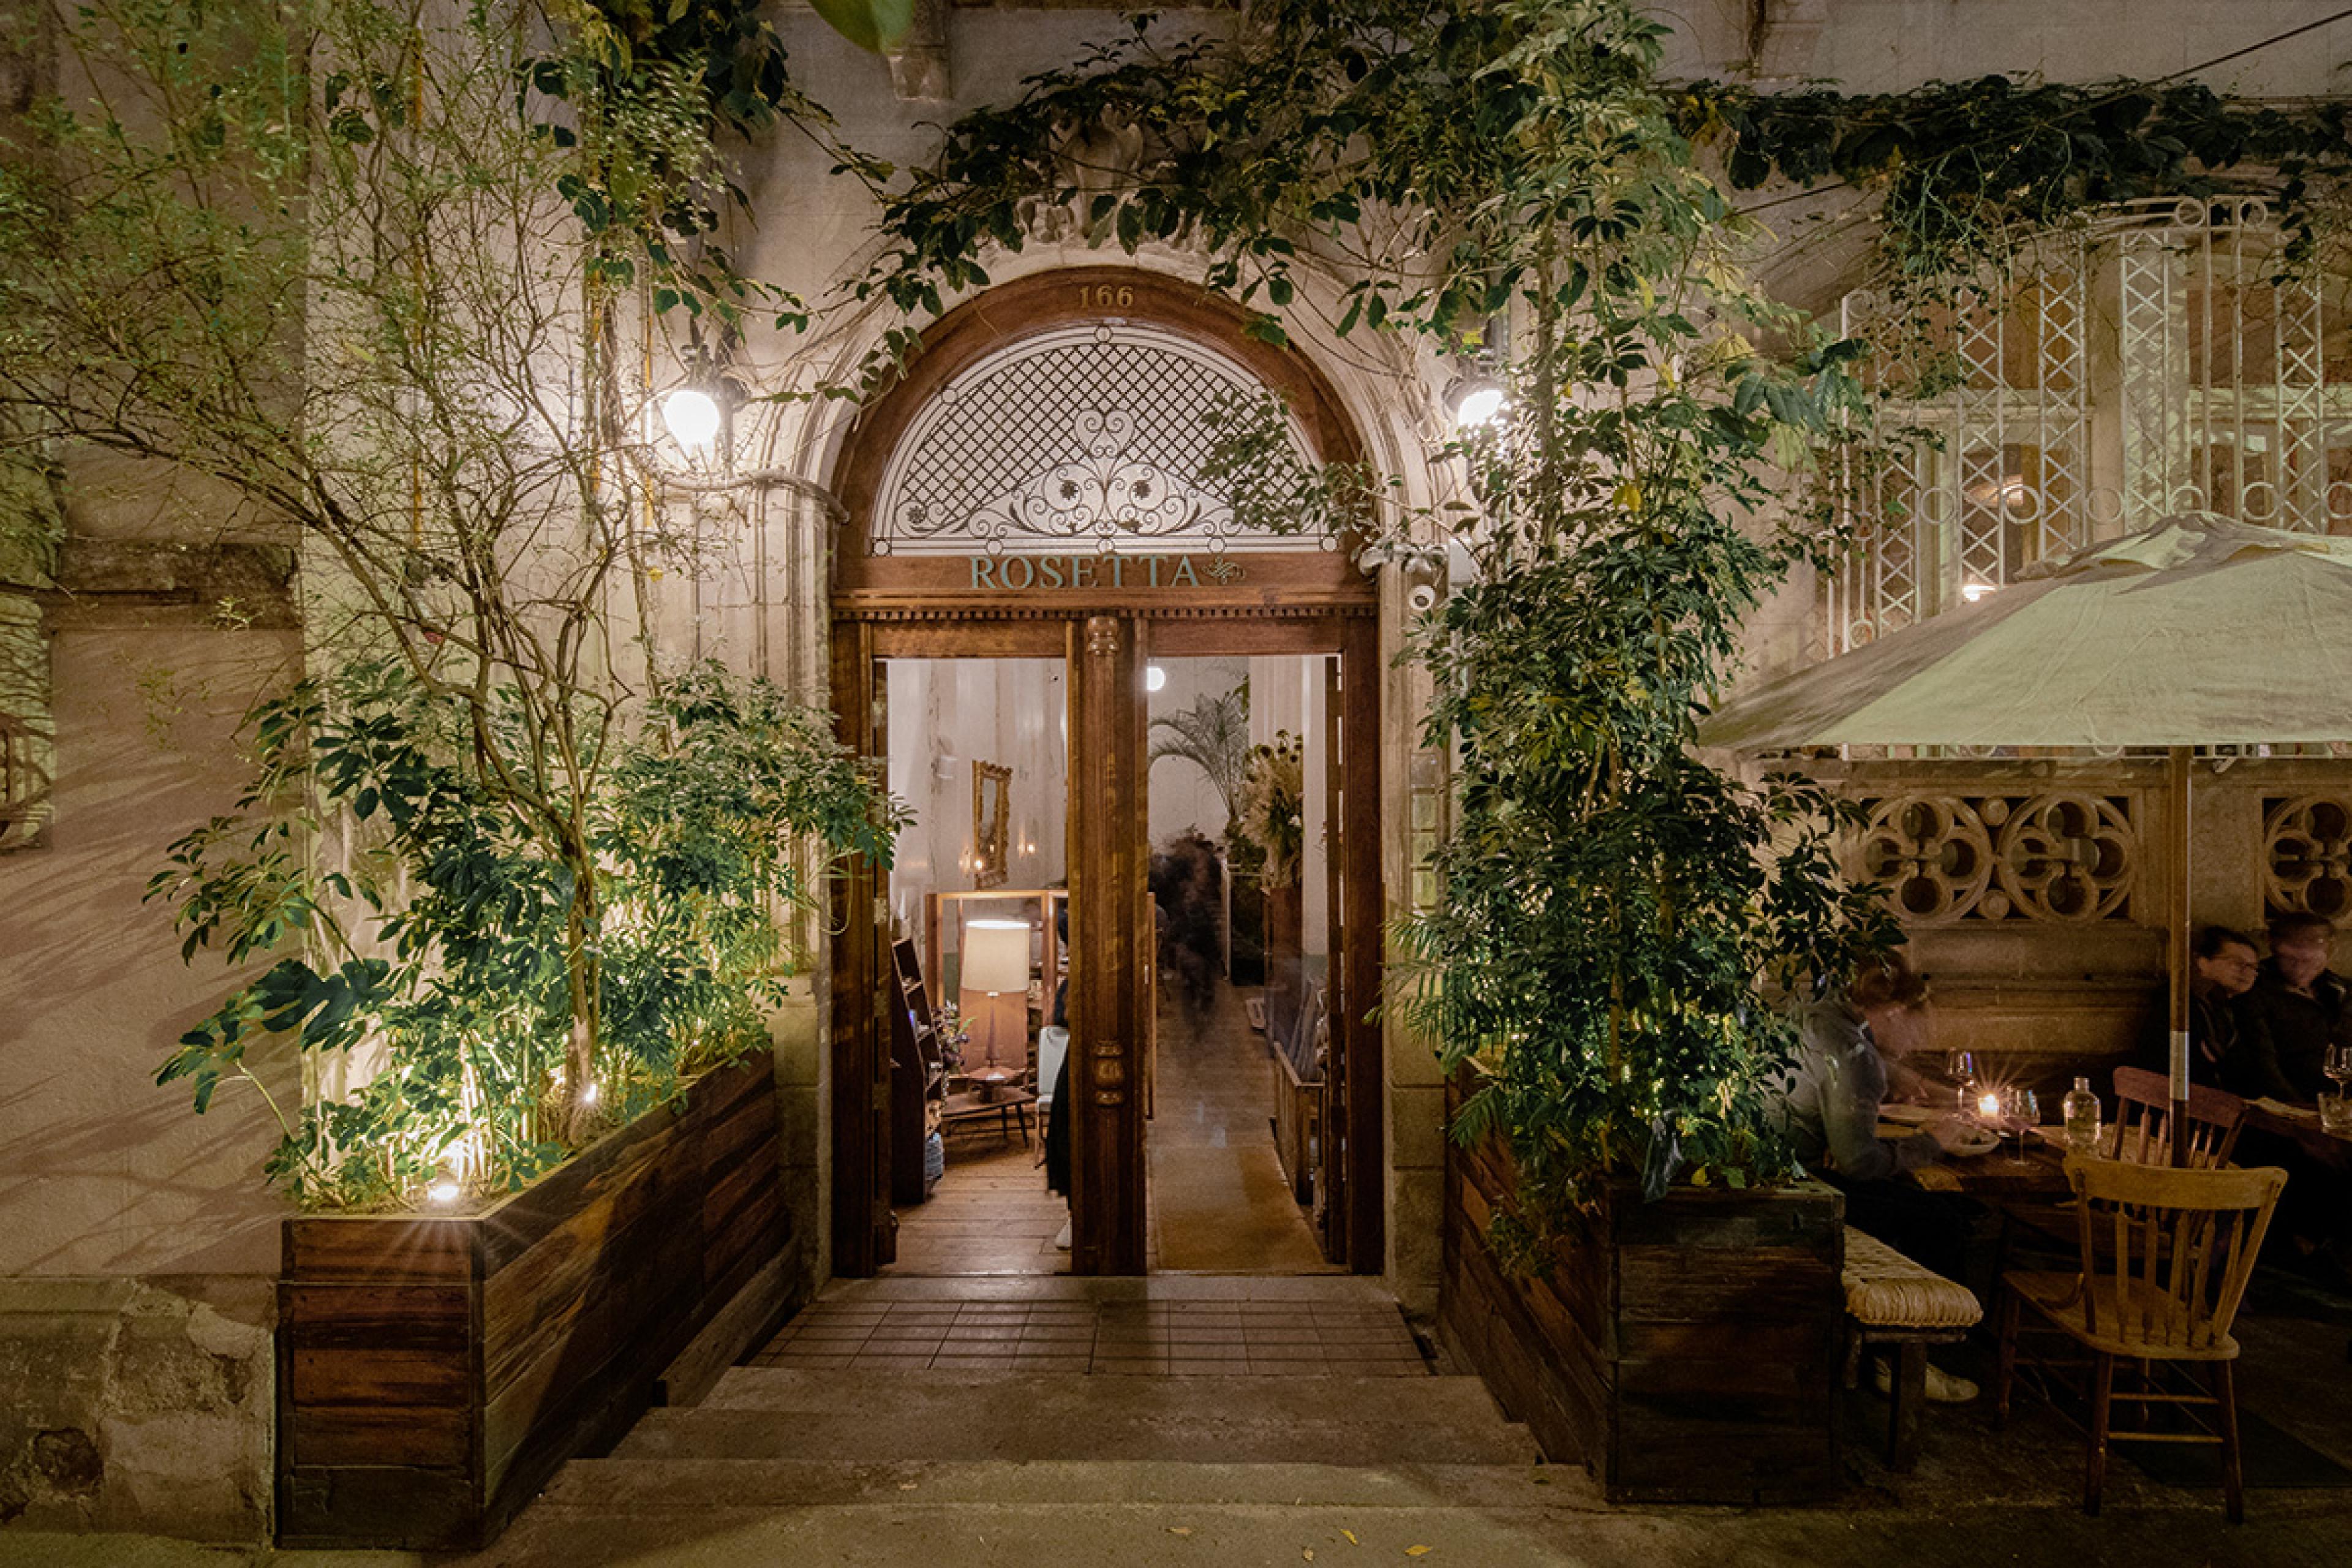 whimsical restaurant entrance surrounded by vines